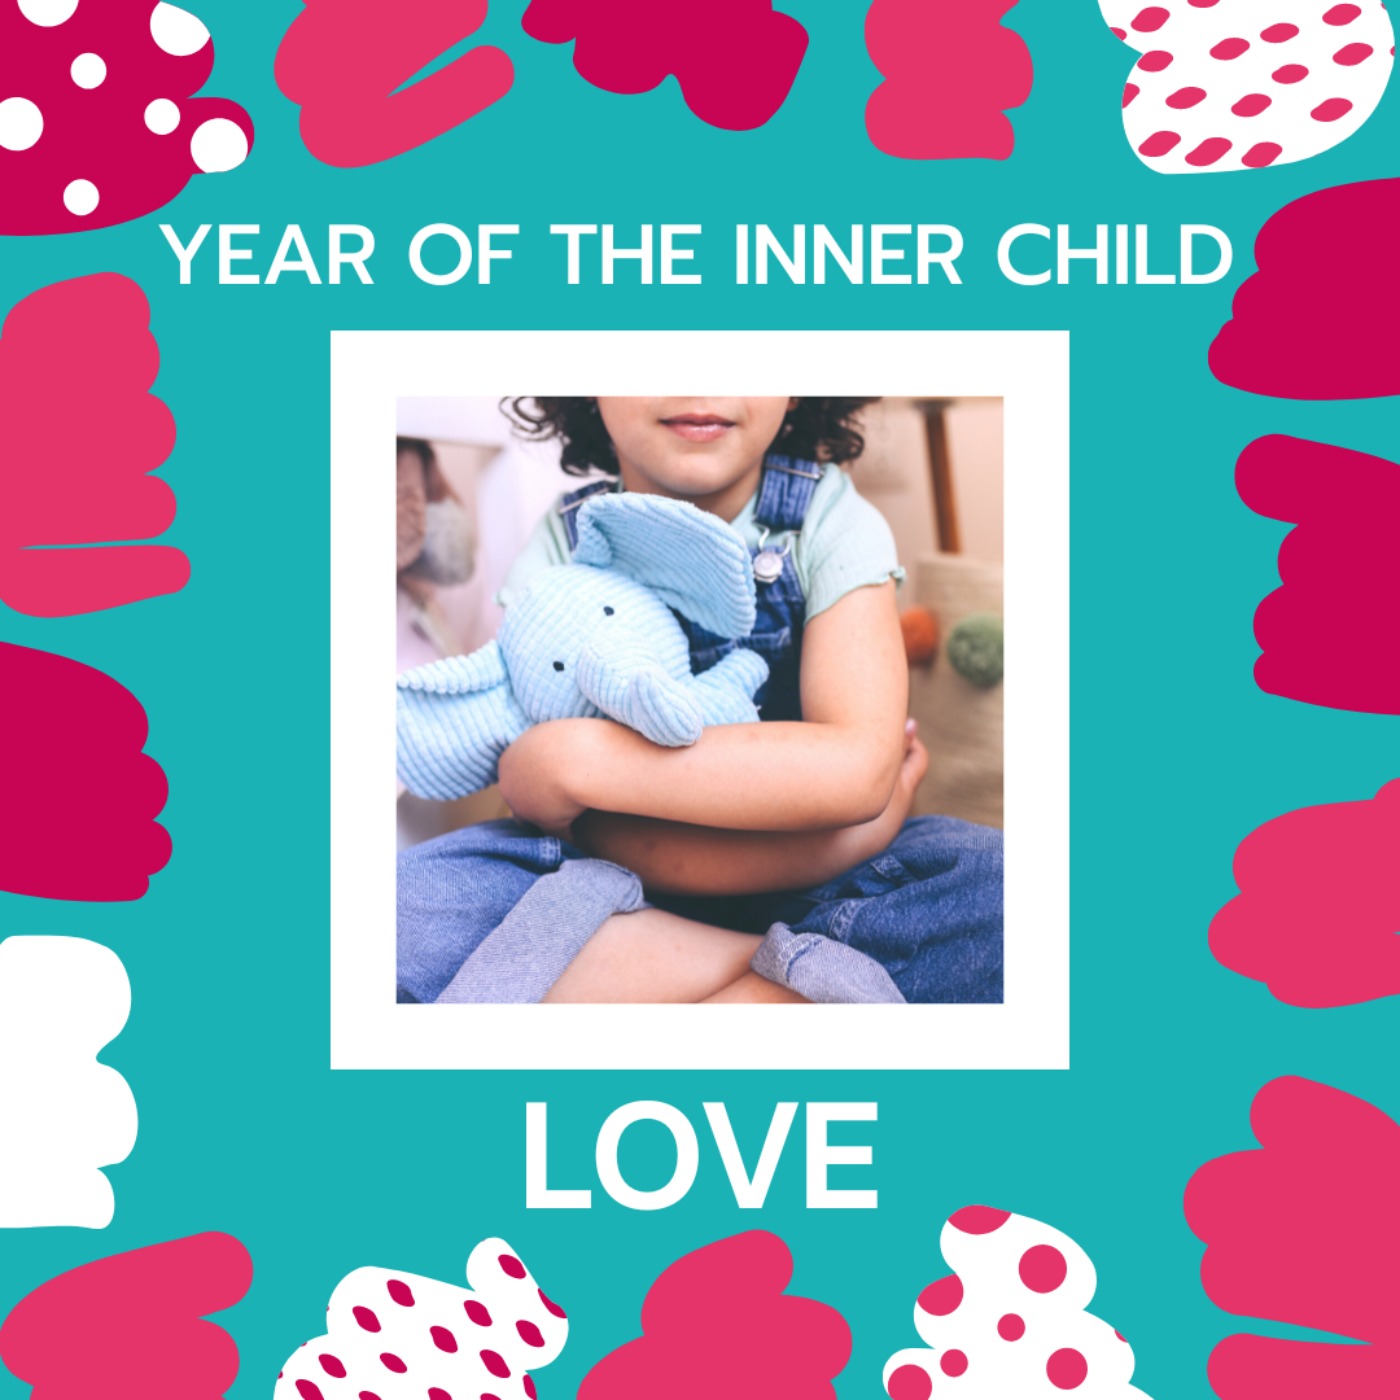 Year of the Inner Child: Love